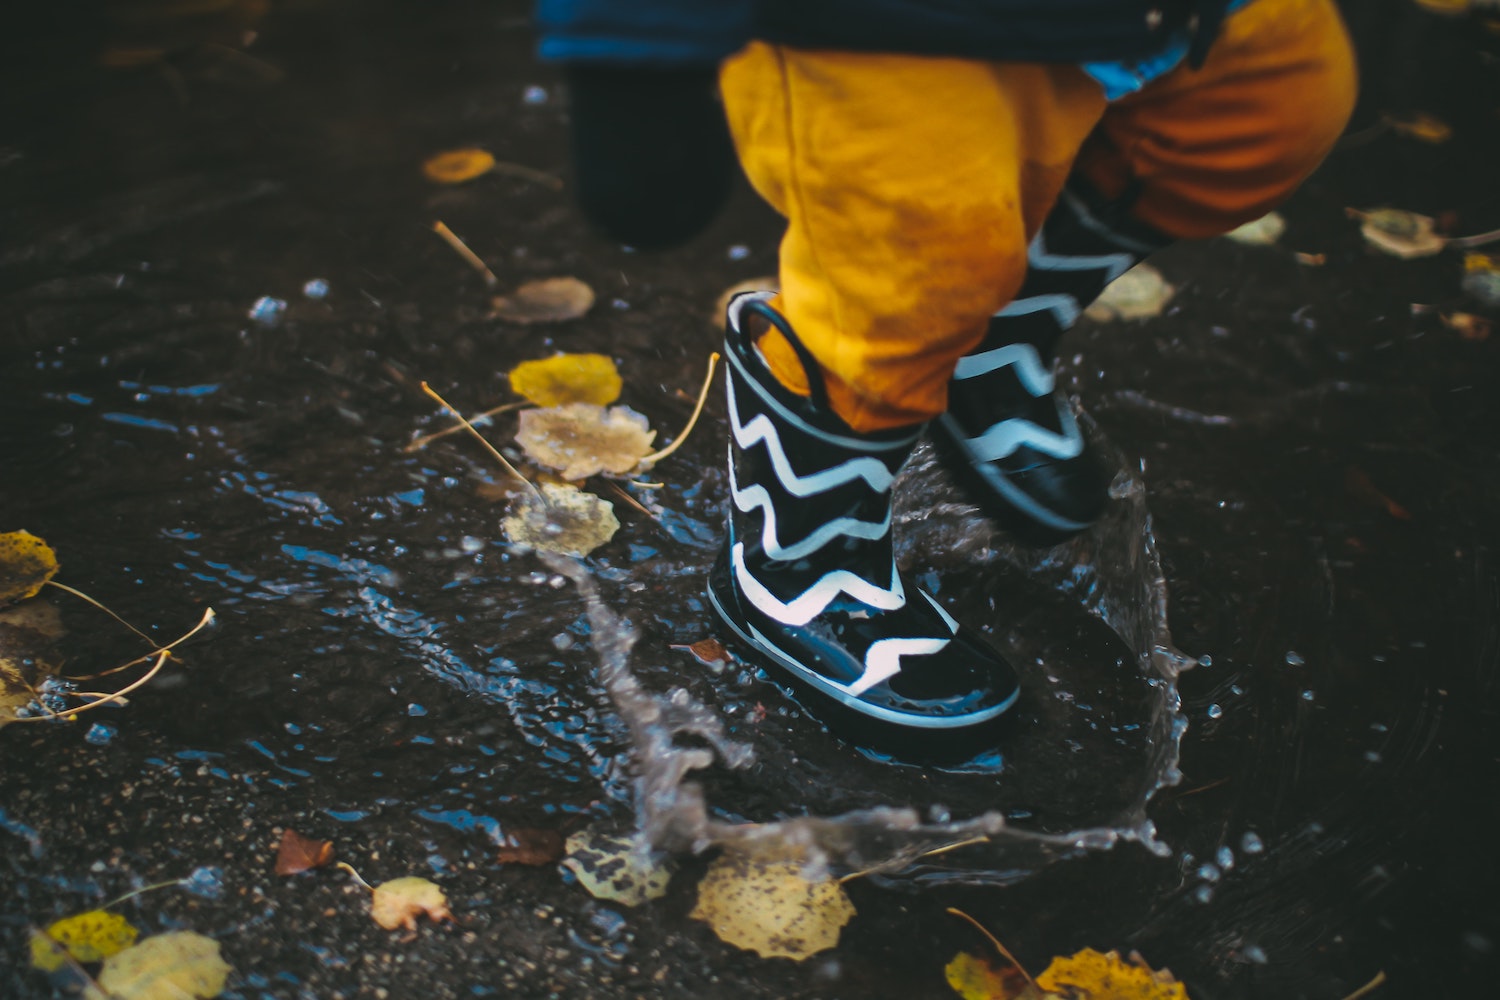 Kid jumping in a puddle wearing rubber boots